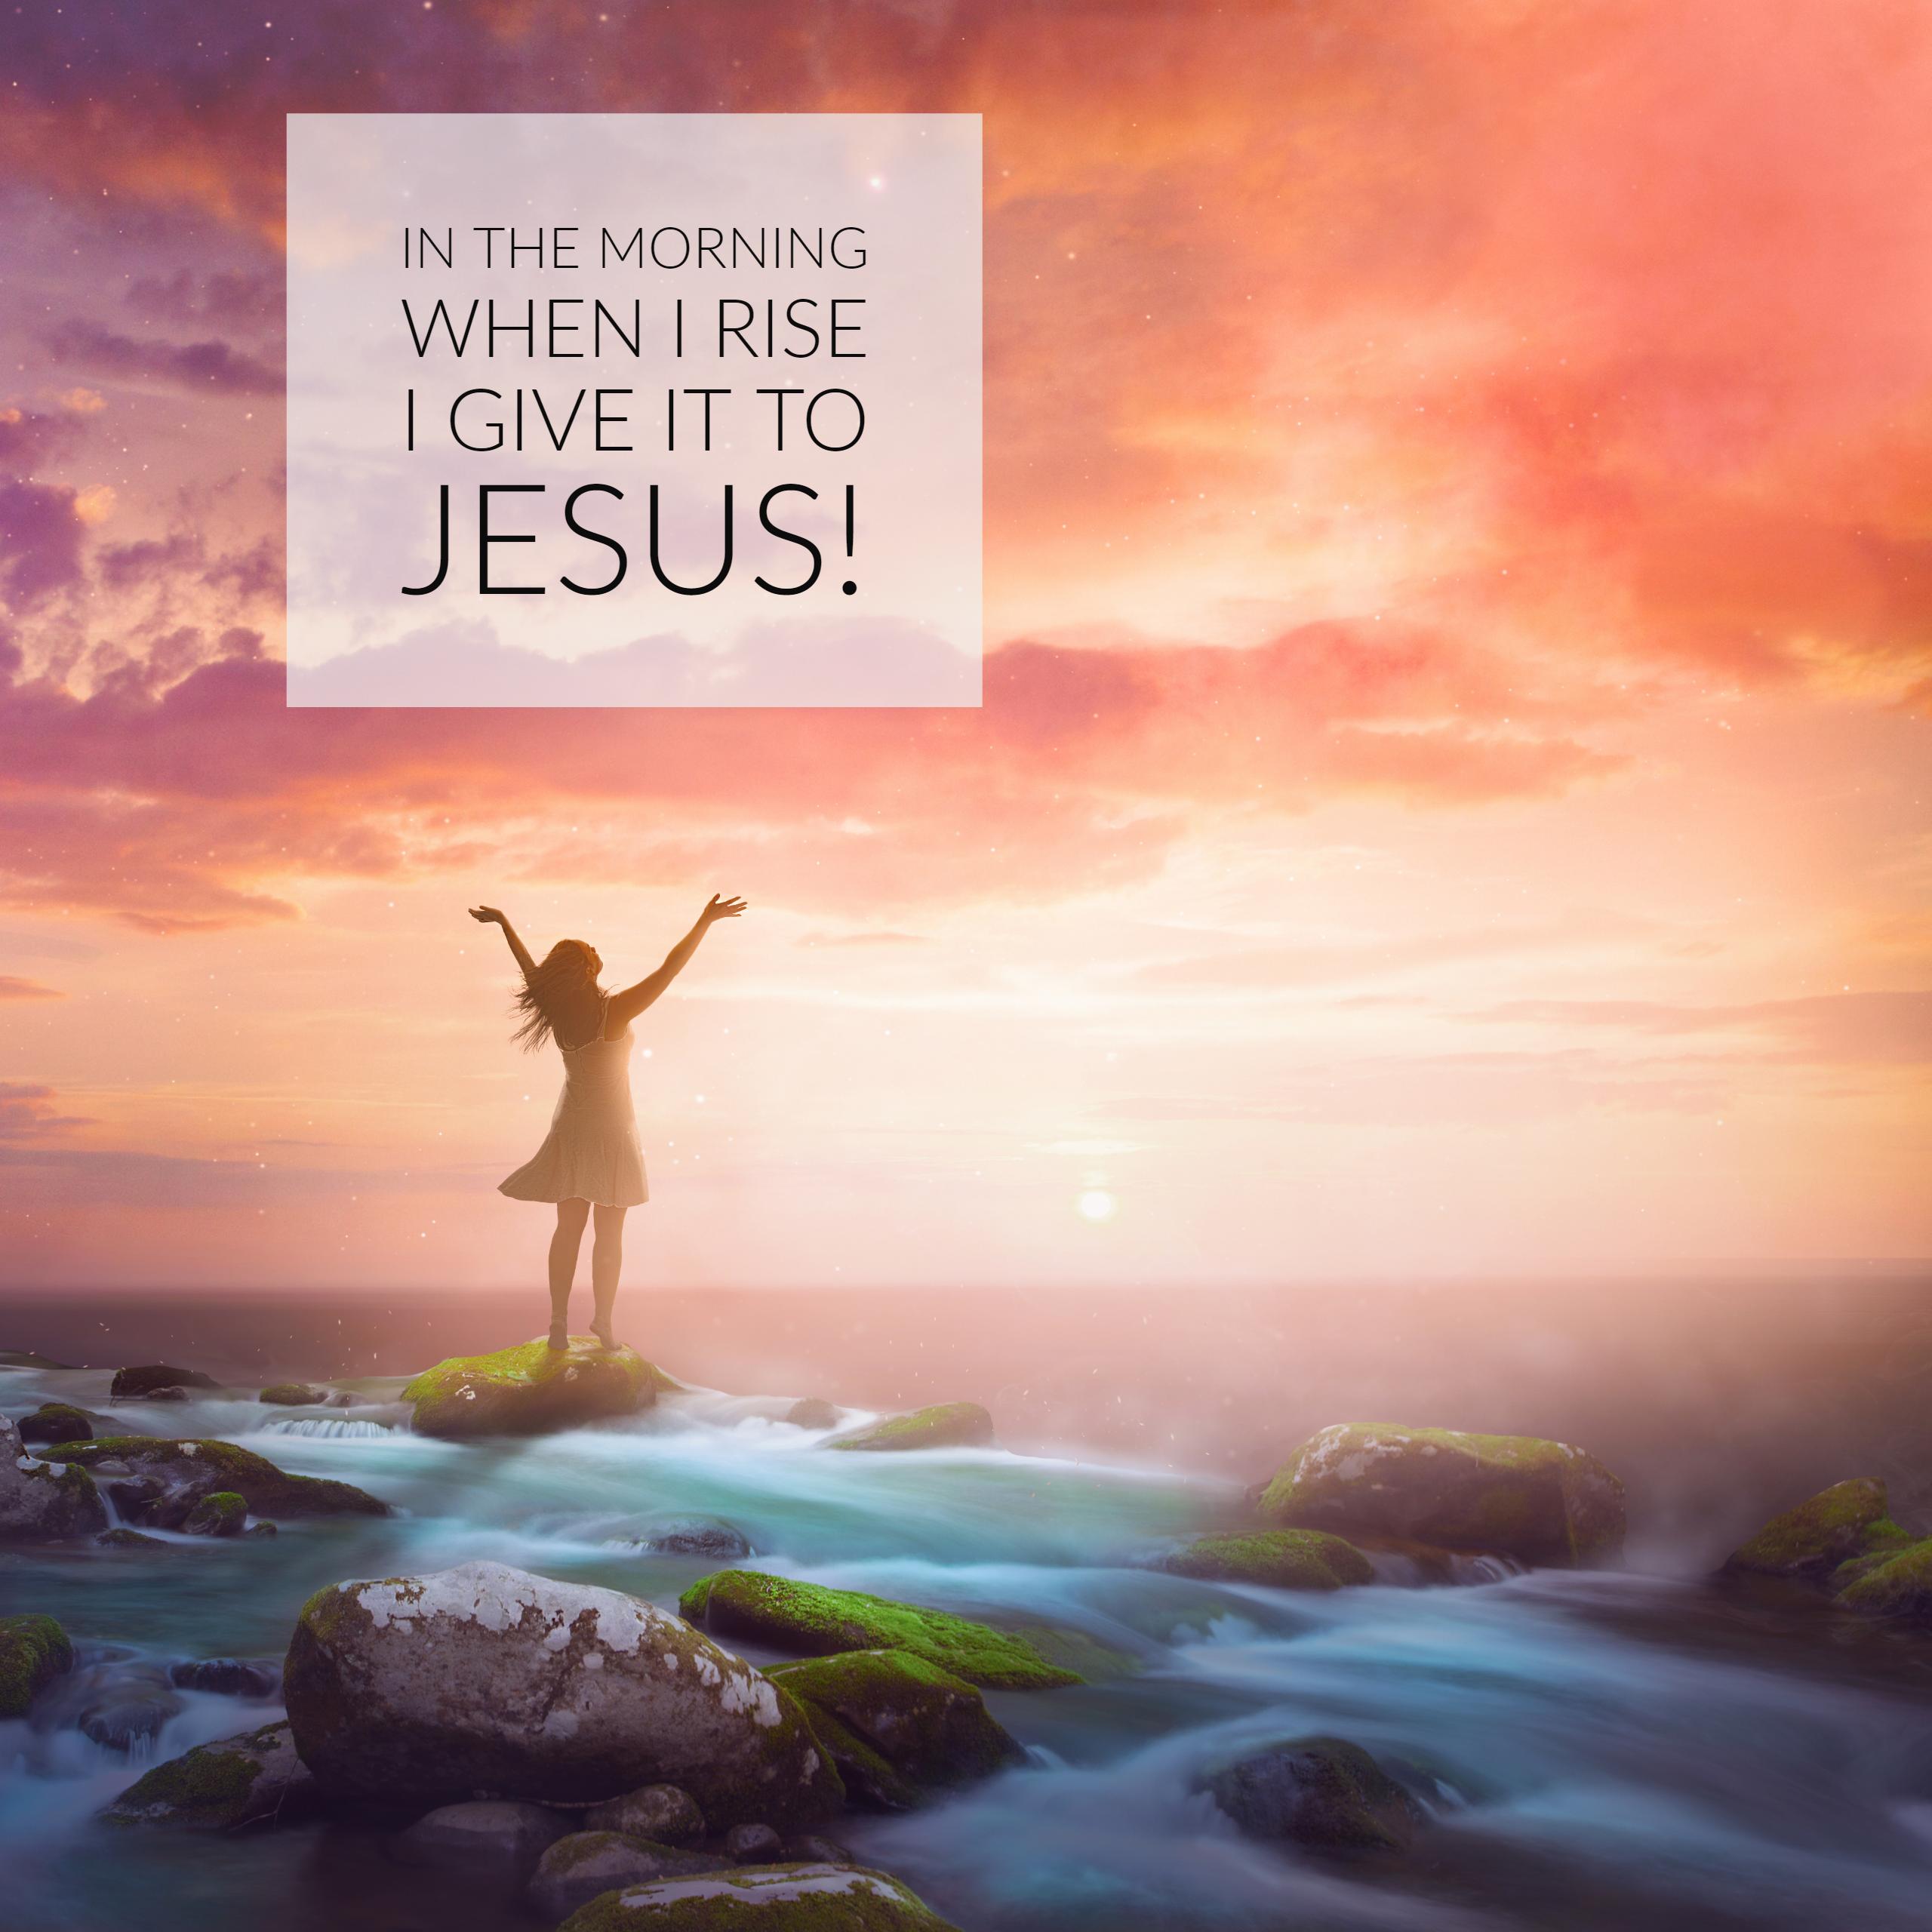 In the morning when I rise I give it to Jesus!